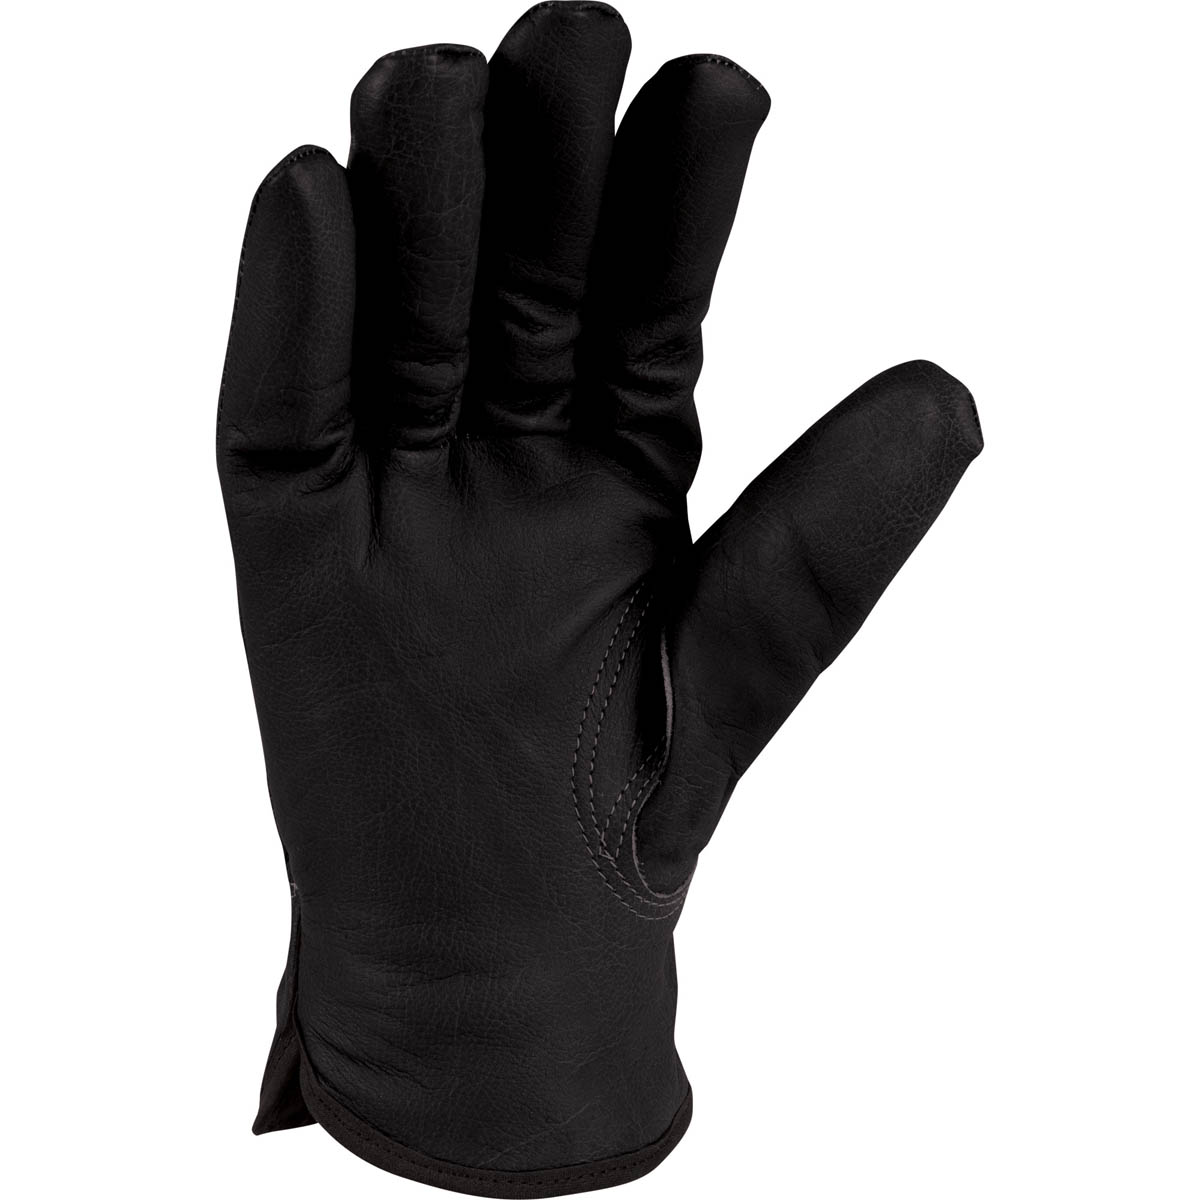 Carhartt Mens Insulated Leather Driver Glove